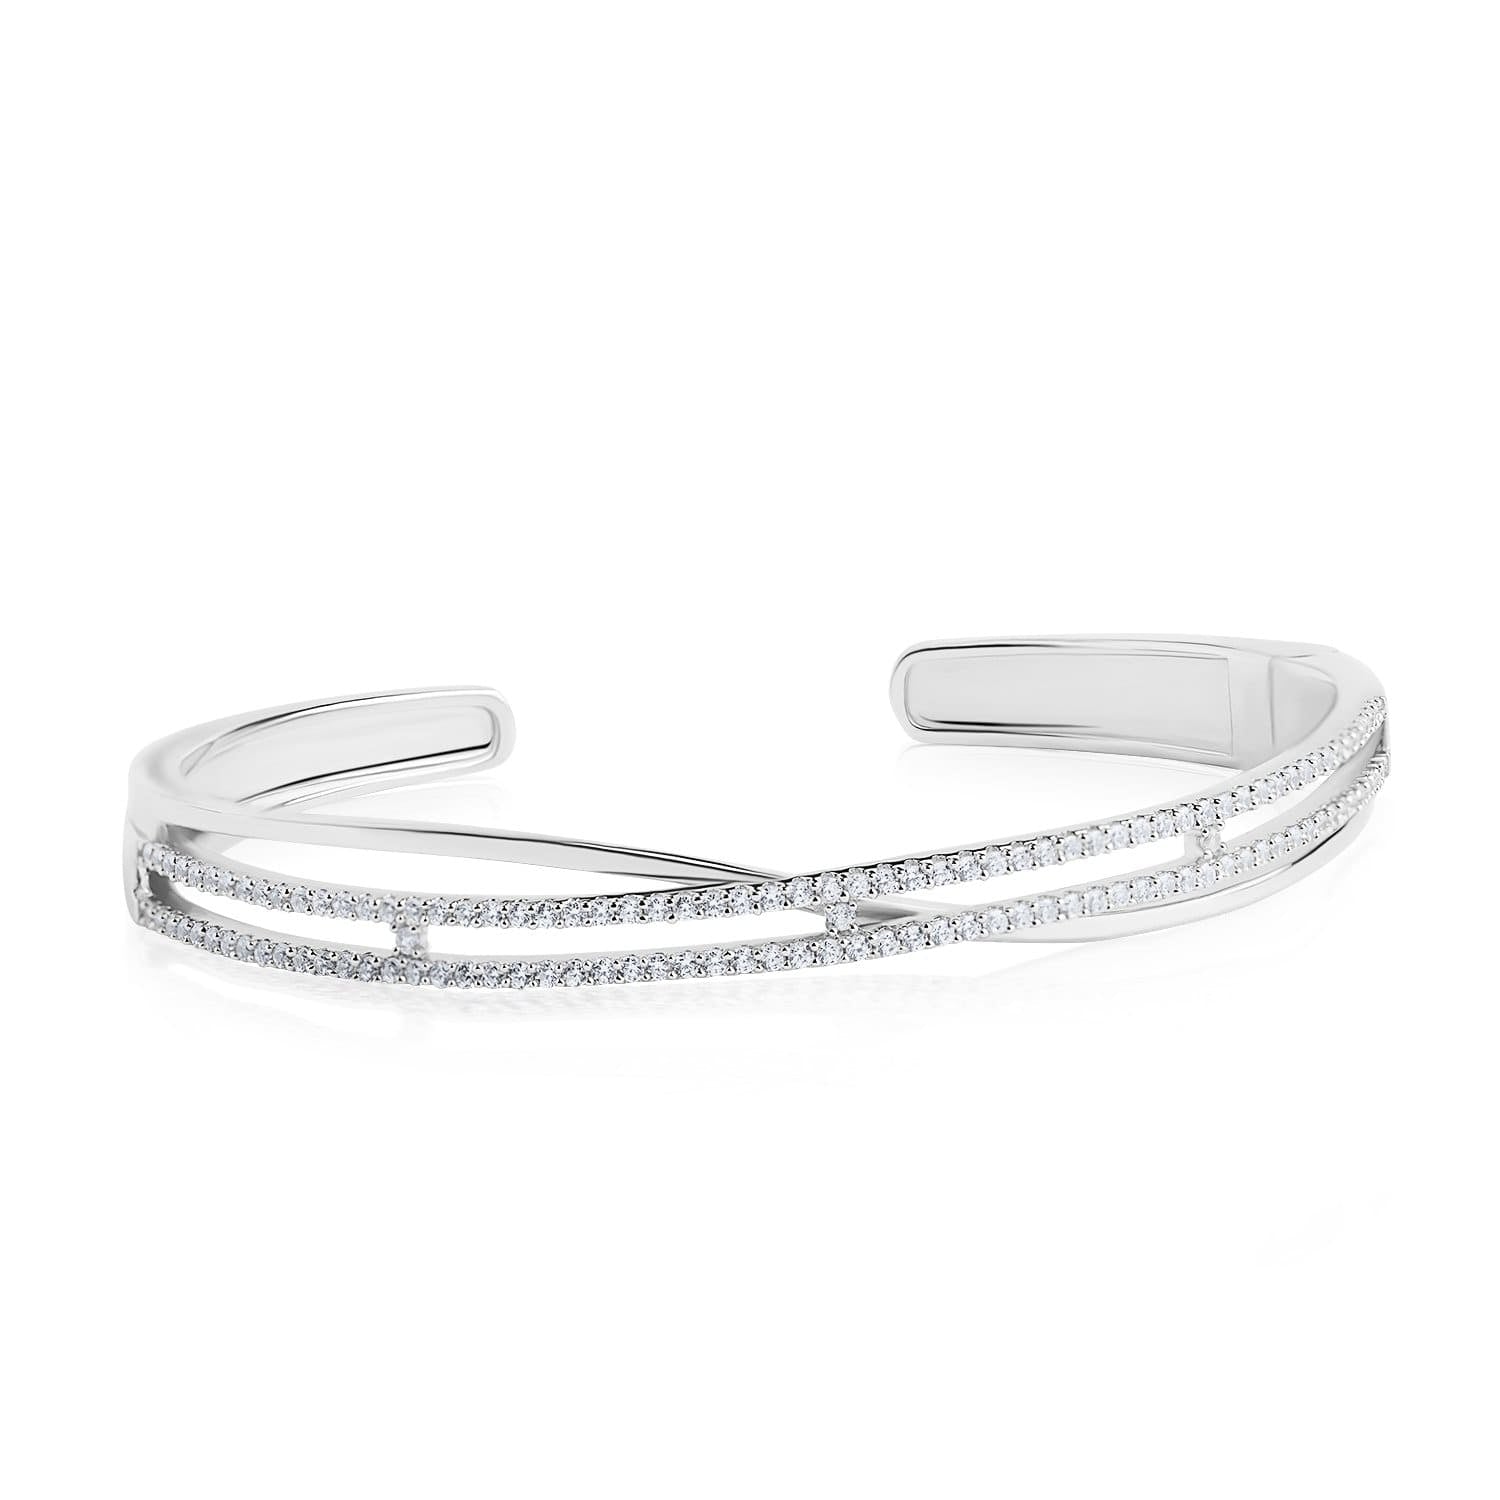 Lynora Jewellery Bracelet 7.5" / Sterling Silver / Clear Micro Pave Bangle Sterling Silver